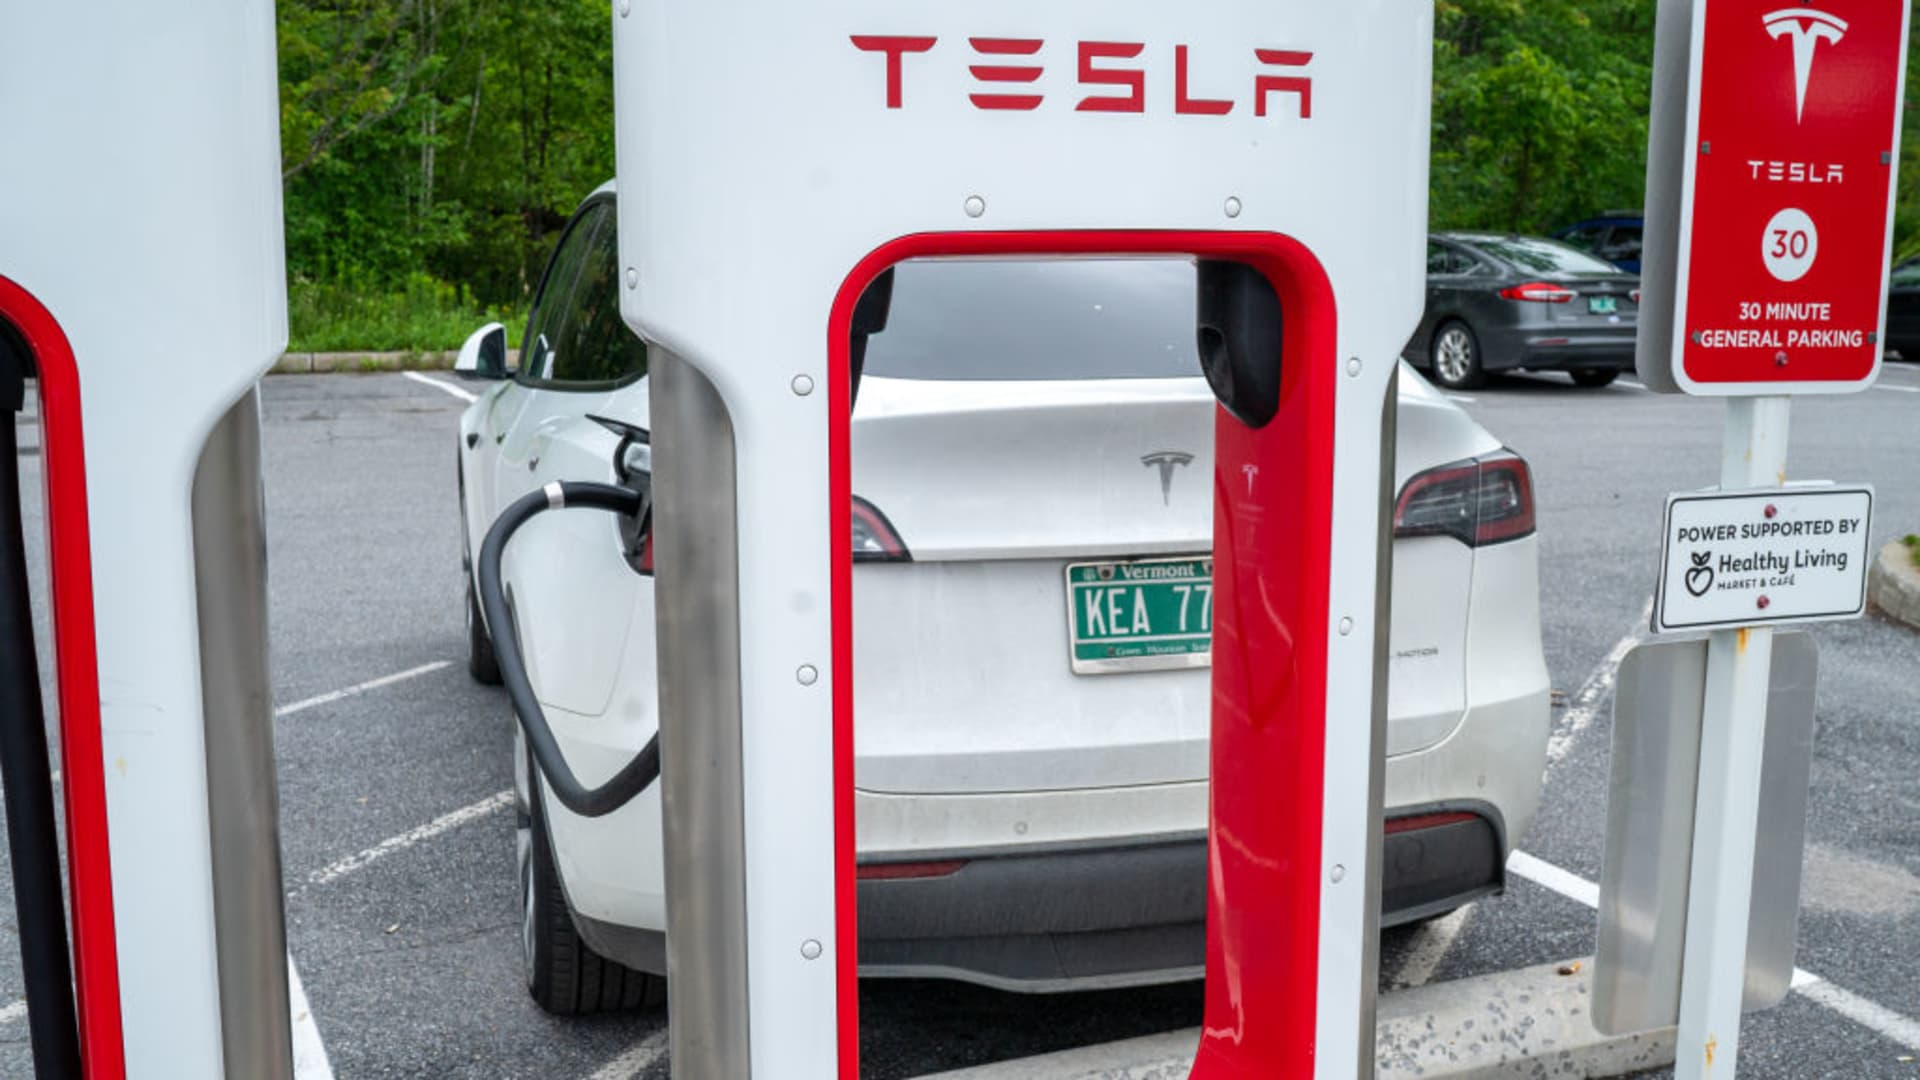 Tesla to Rake in Billions as it Opens U.S. Charging Stations to Ford and Other Electric Vehicle Owners